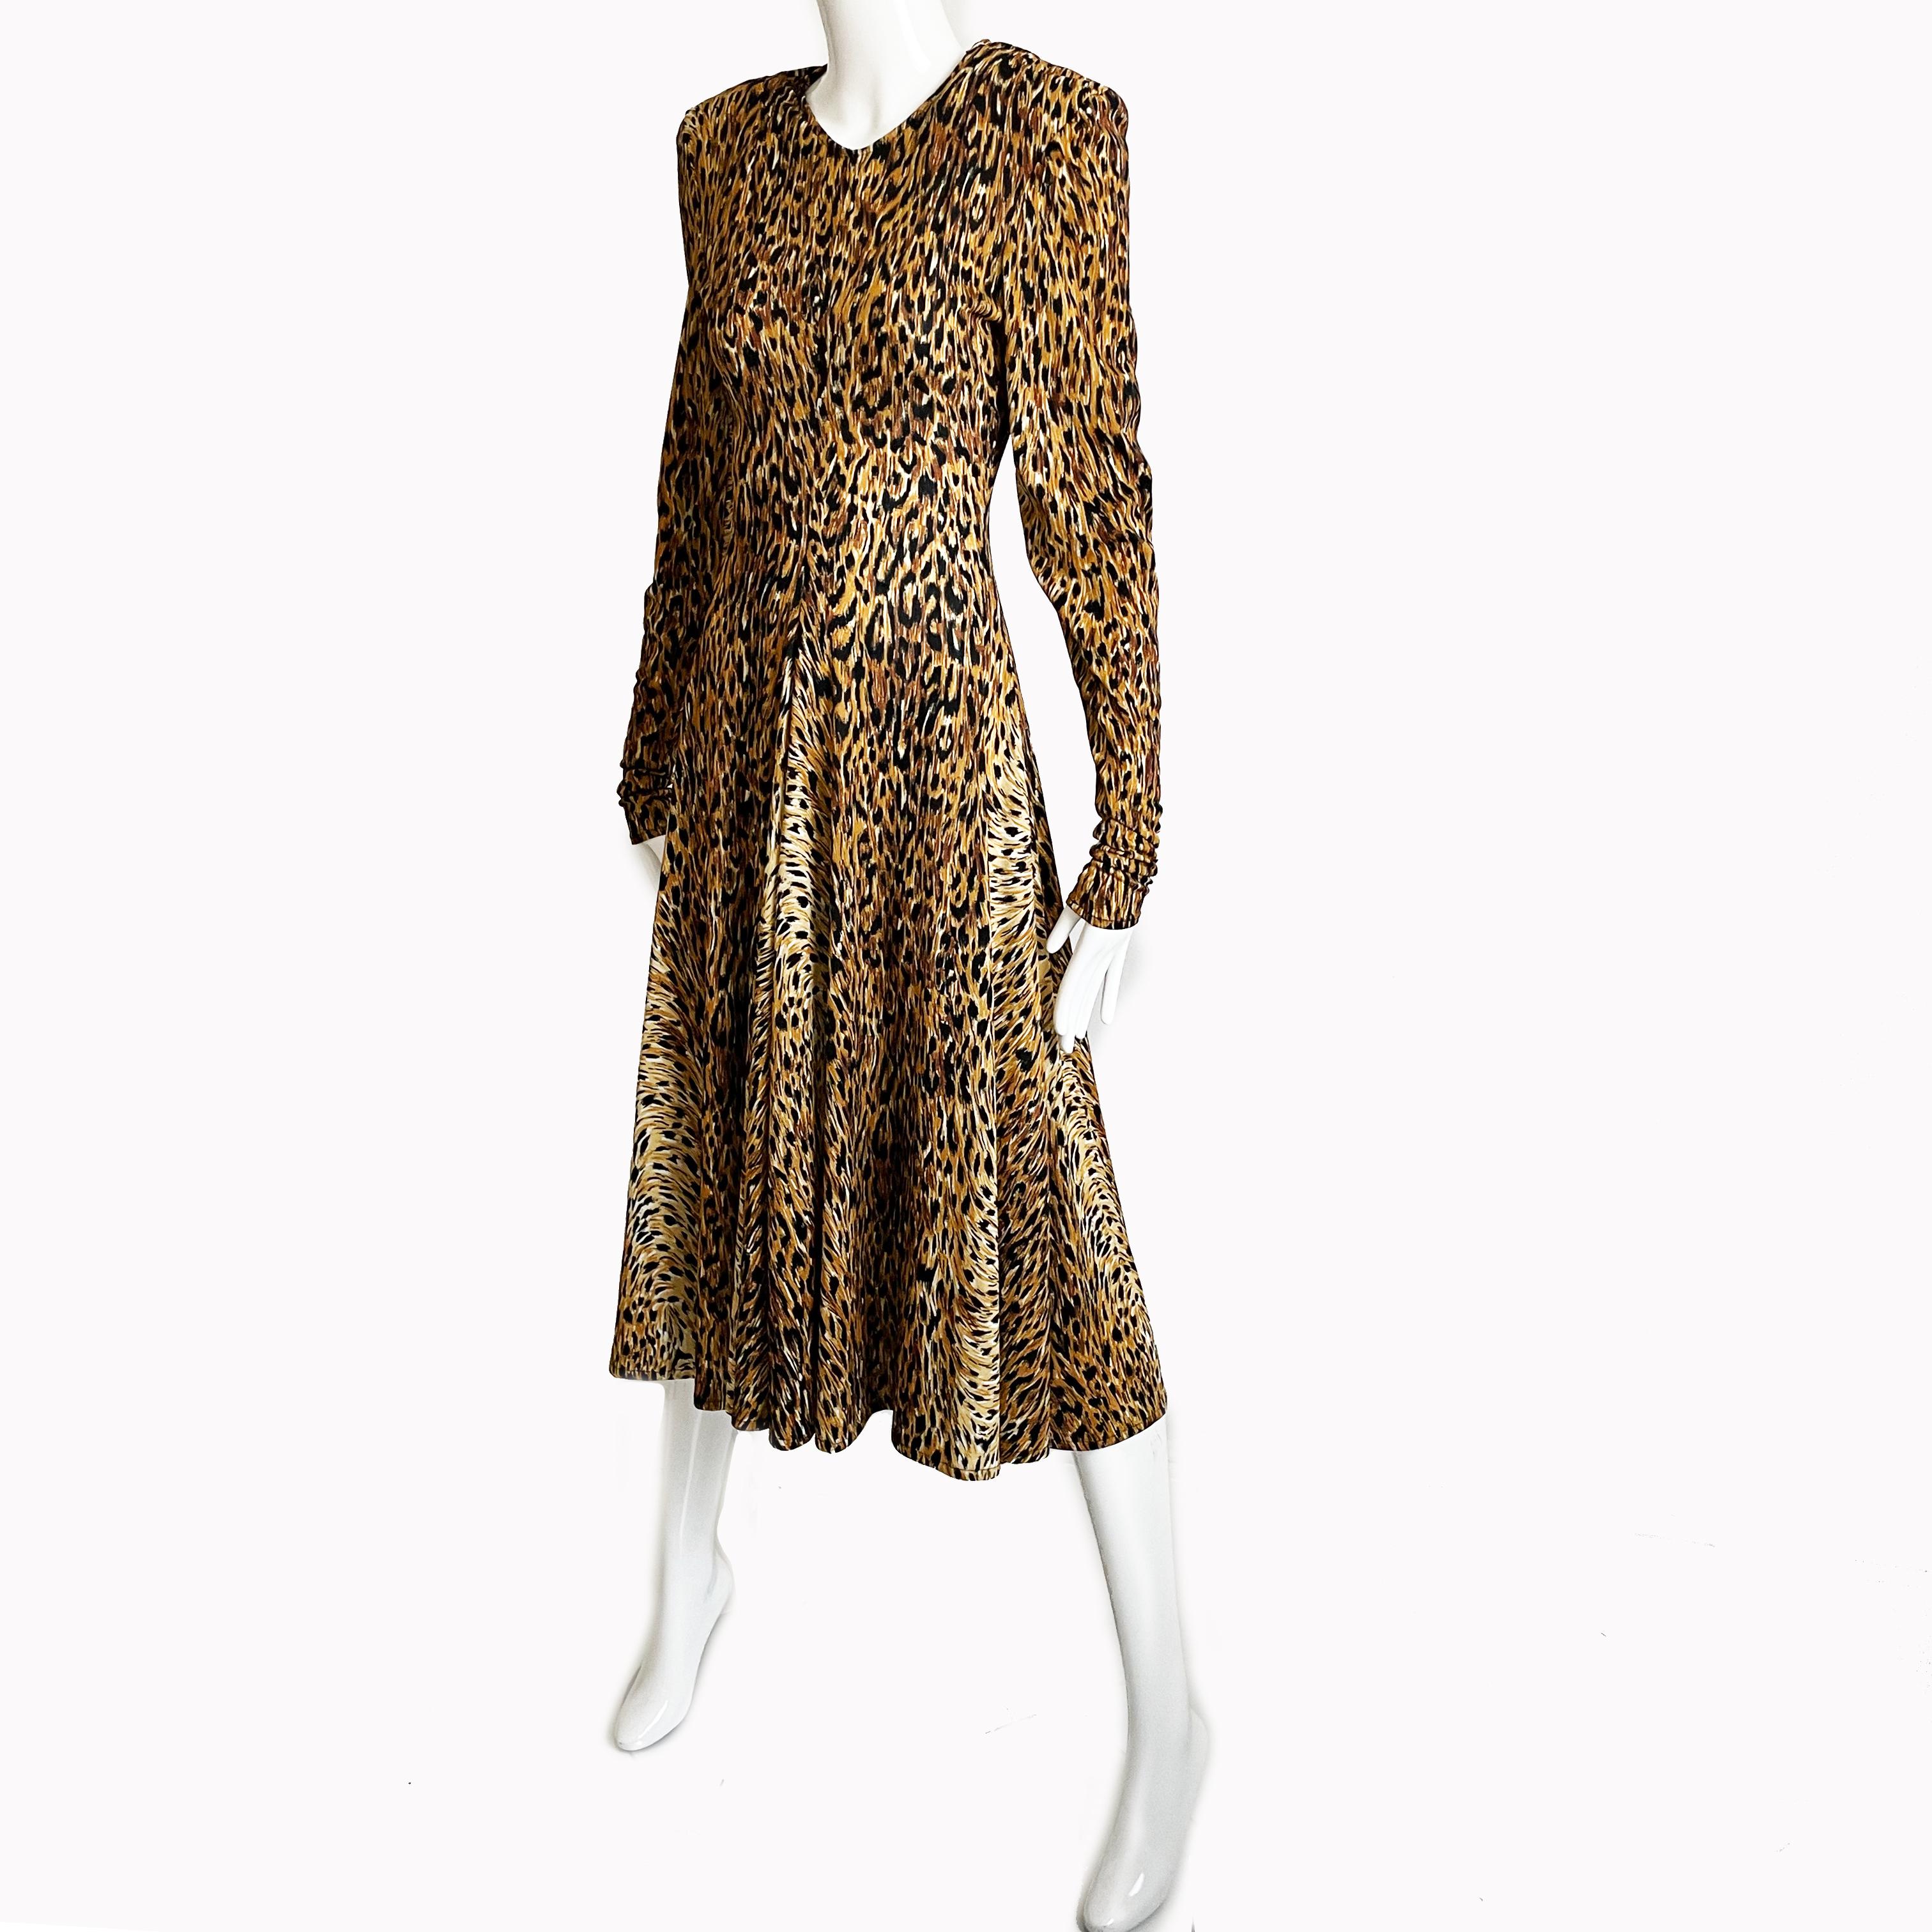 Authentic, preowned, vintage Norma Kamali leopard print dress with wide circle skirt, circa the 80s. Made from lightweight jersey fabric. Unlined/removable shoulder pads/slips over head. No content label, feels synthetic. Hand wash only. 